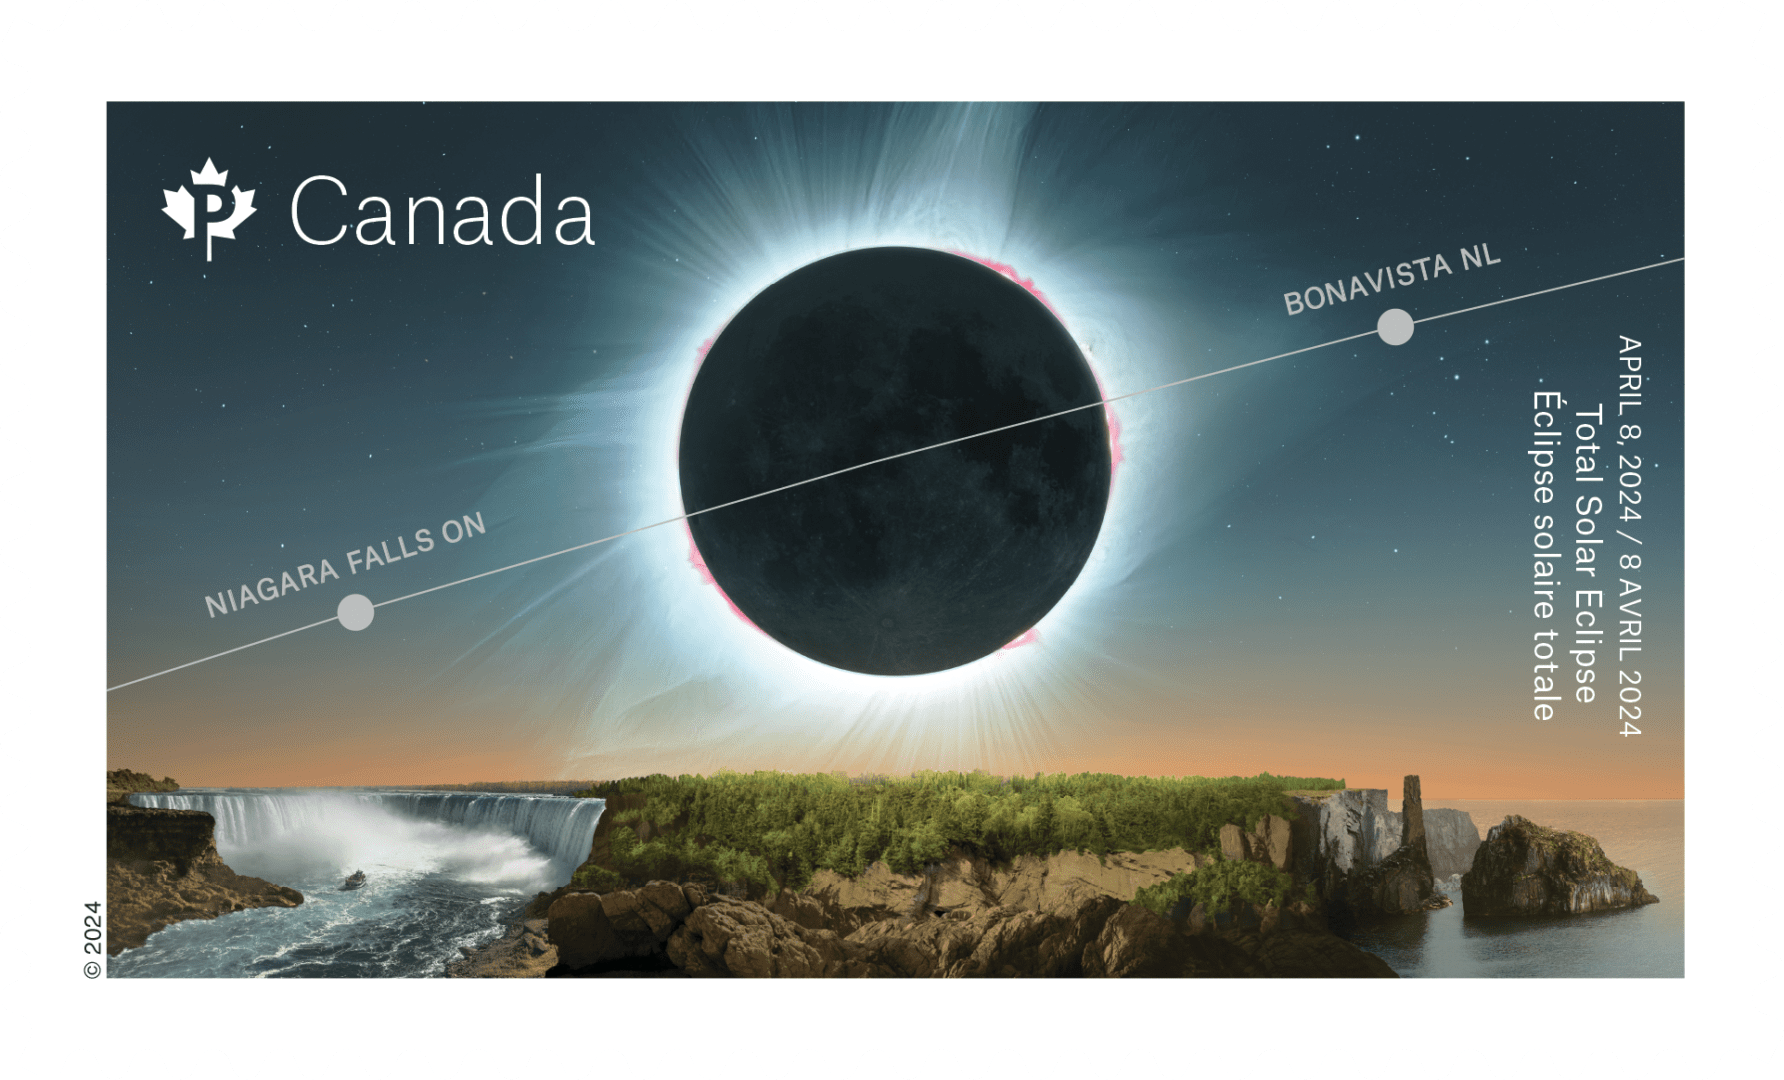 Total Solar Eclipse 2024 stamp from Canada Post, featuring the solar eclipse path of totality across the Bonavista Peninsula. The Chimney at Spillar's Cove, one of the geosites from the Discovery Global Geopark is featured.